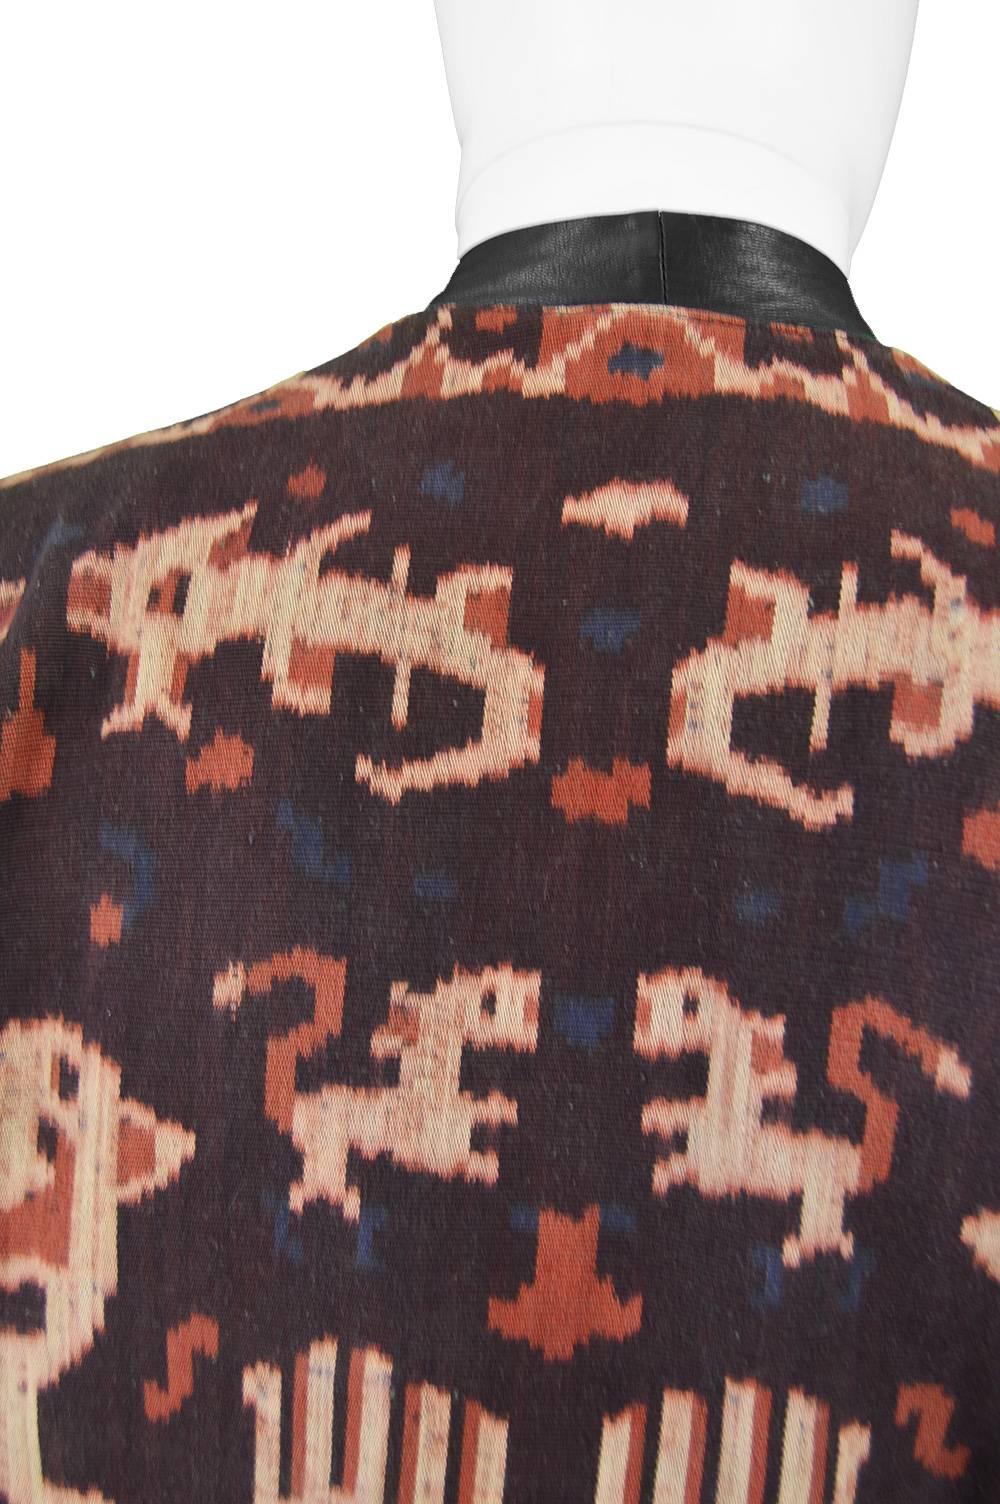 Abrasive Aorta Men's Vintage Leather and Handwoven Ikat Tapestry Jacket, 1980s For Sale 1